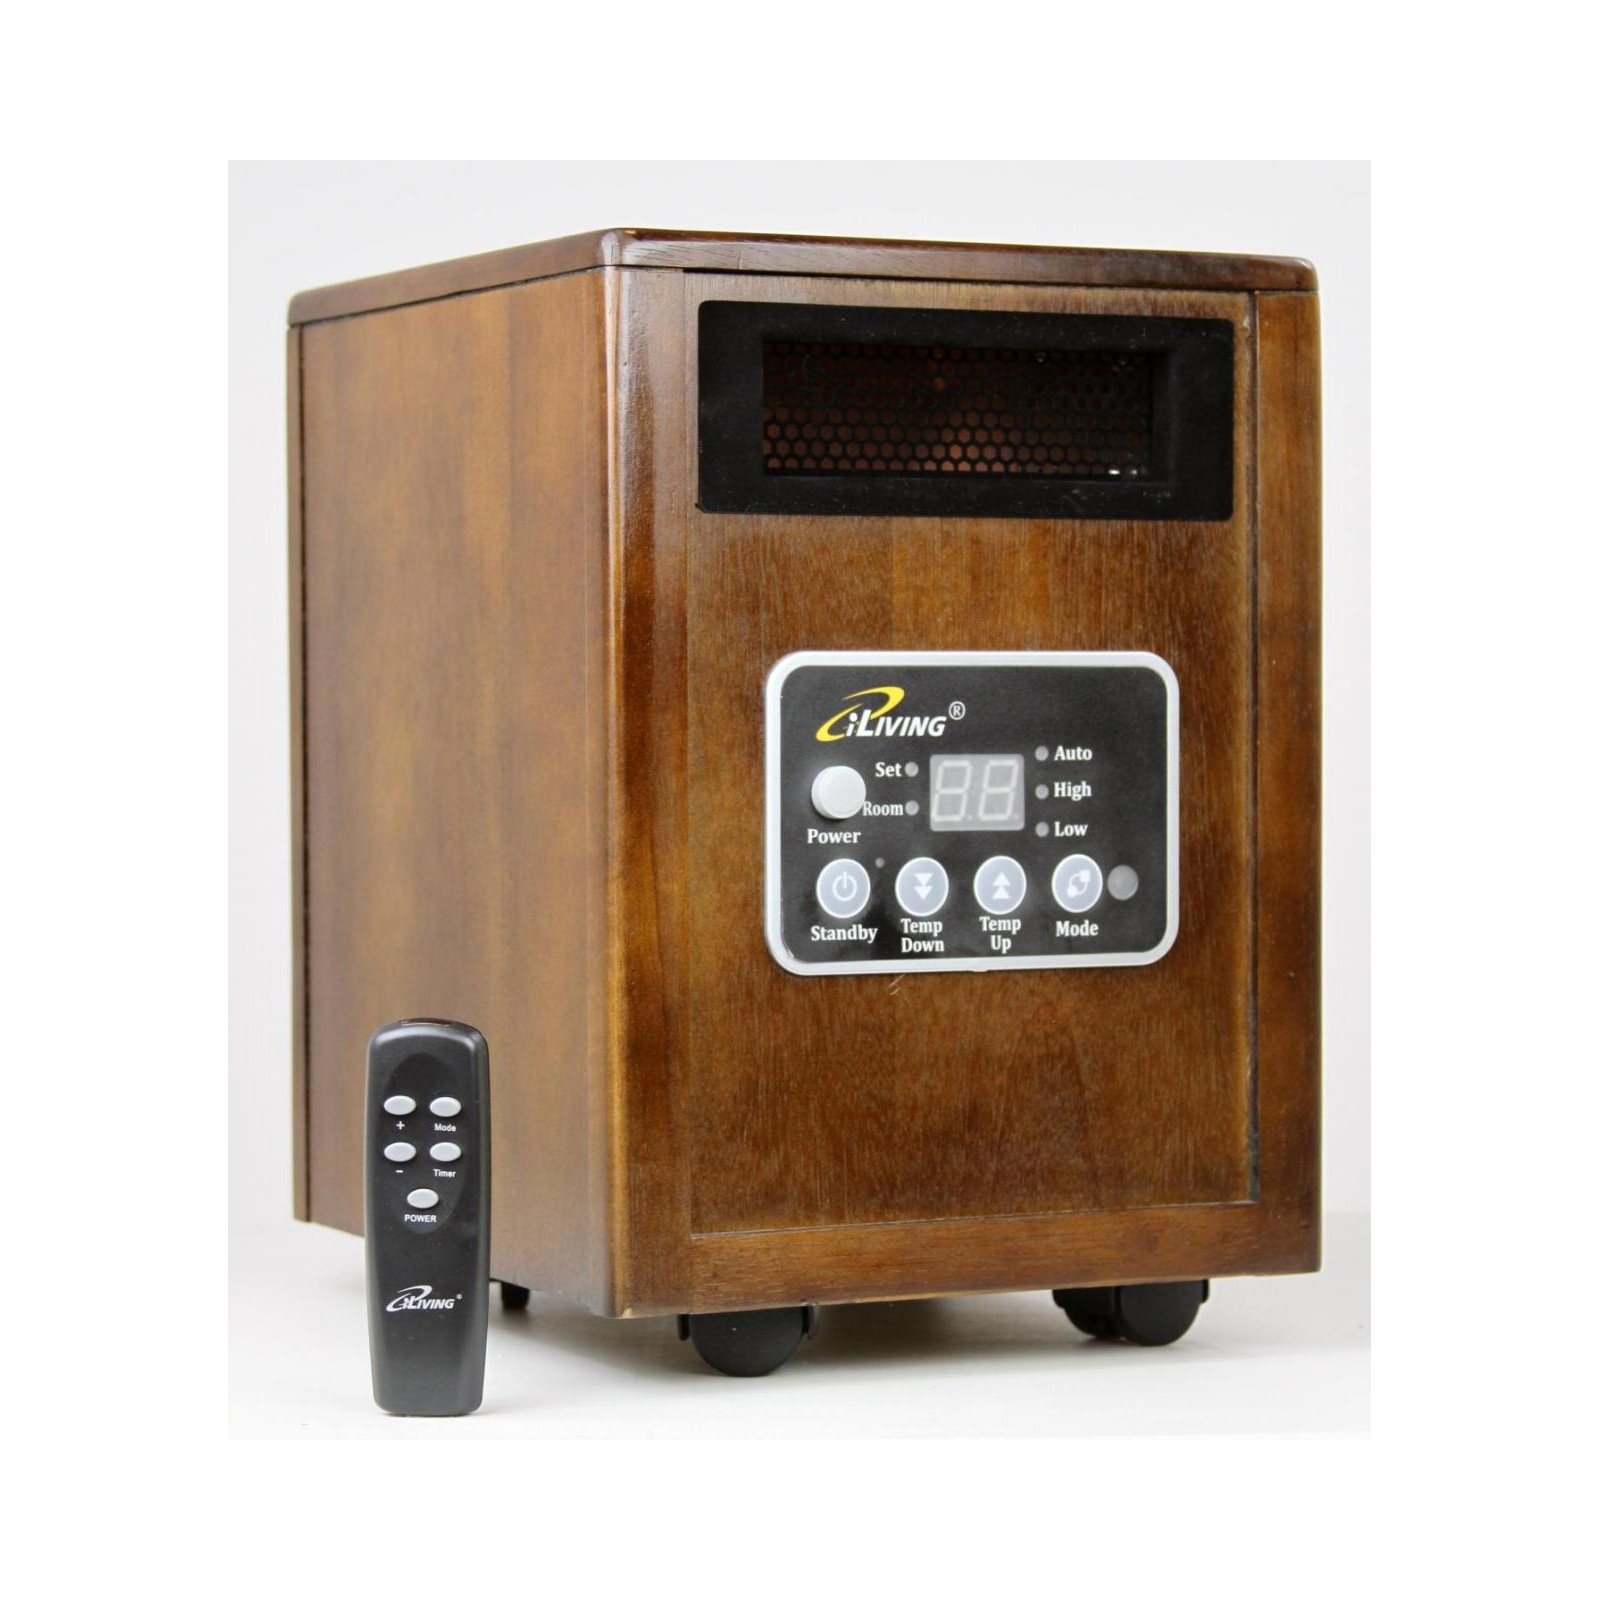 iLIVING ILG918 Infrared Portable Space Heater with Dual Heating System, 1500W, Remote Control, Dark Walnut Wooden Cabinet